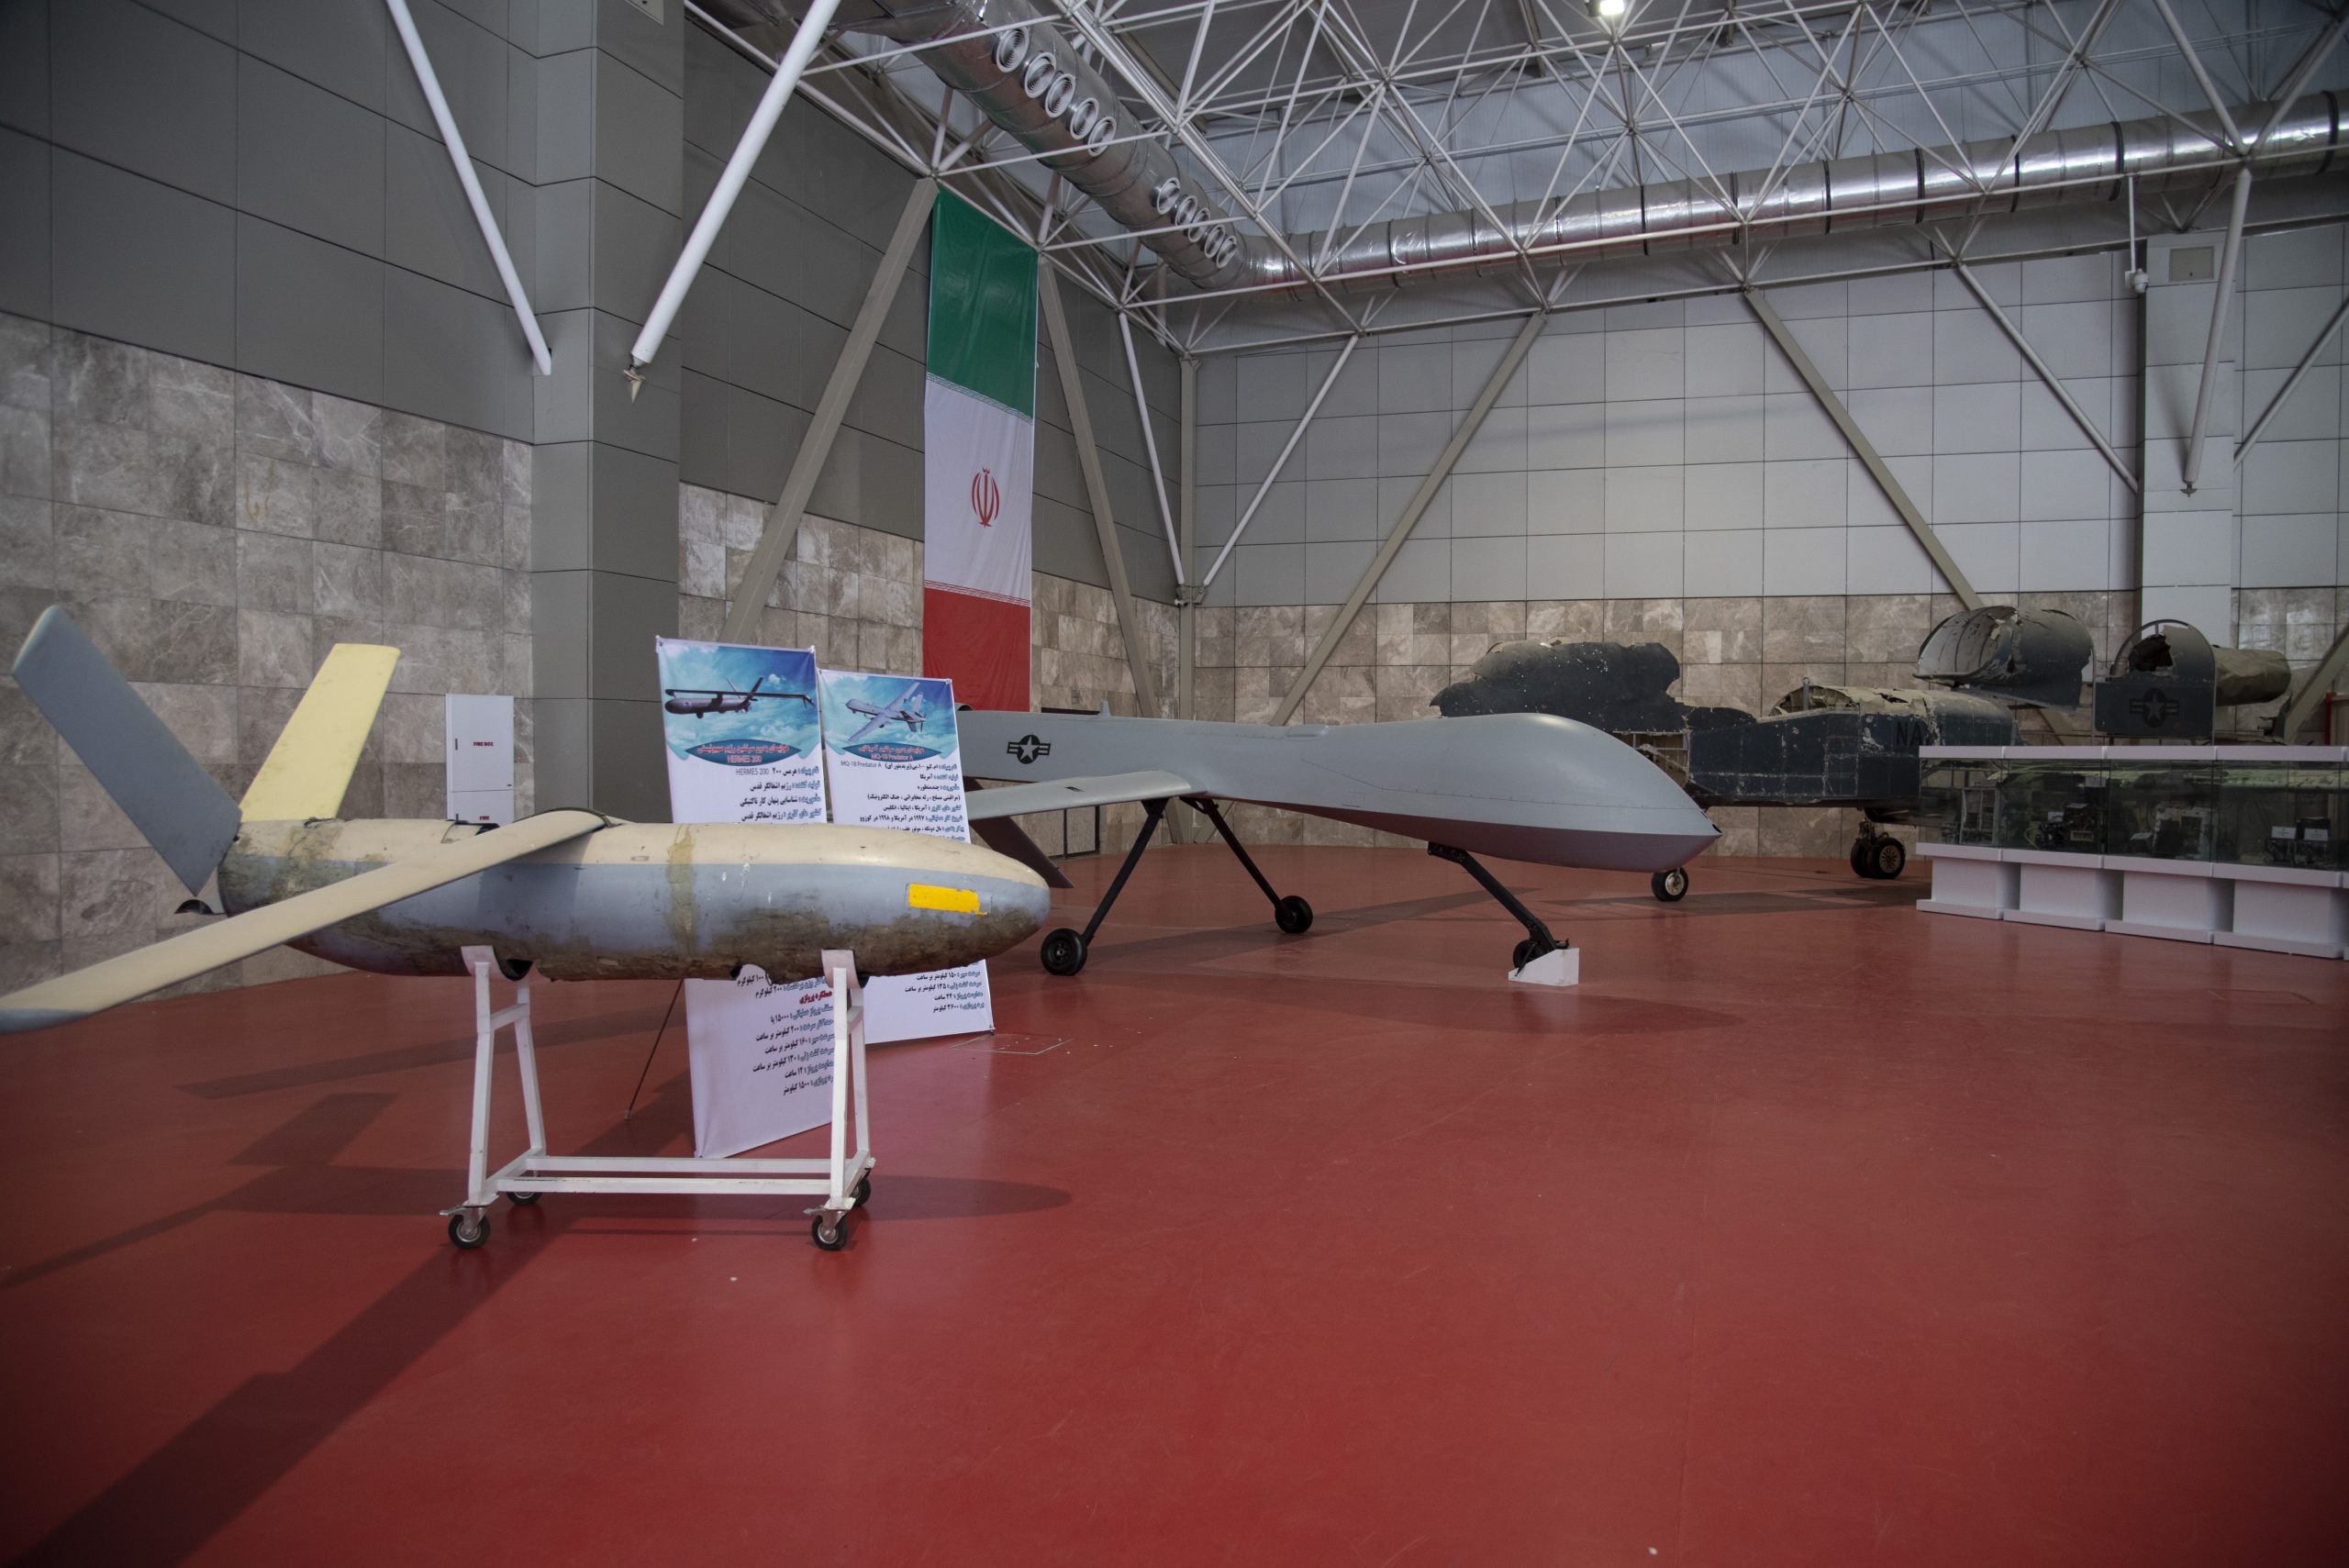 sne hvid operatør Uenighed Iran's drones are clones. Now they're being used in multiple conflicts. -  Atlantic Council